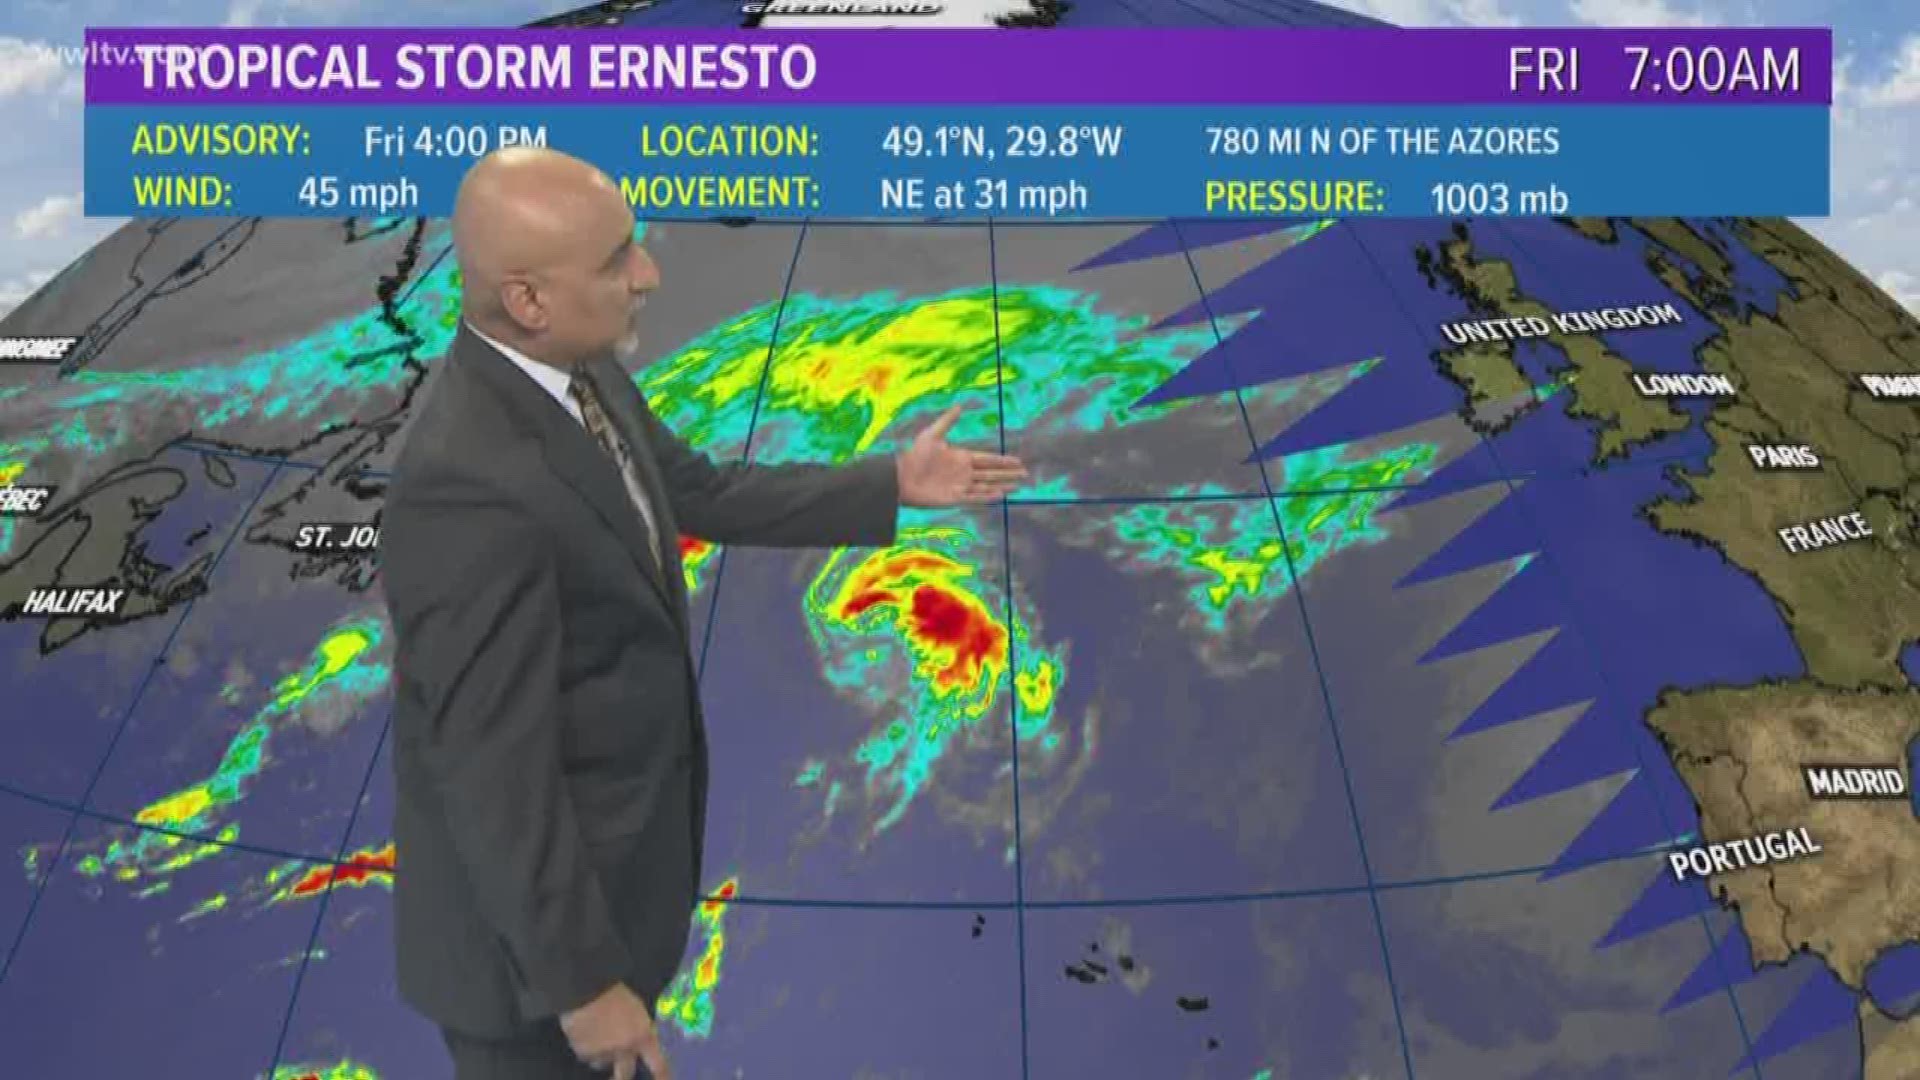 Chief Meteorologist Carl Arredondo and the Friday evening Tropical Update